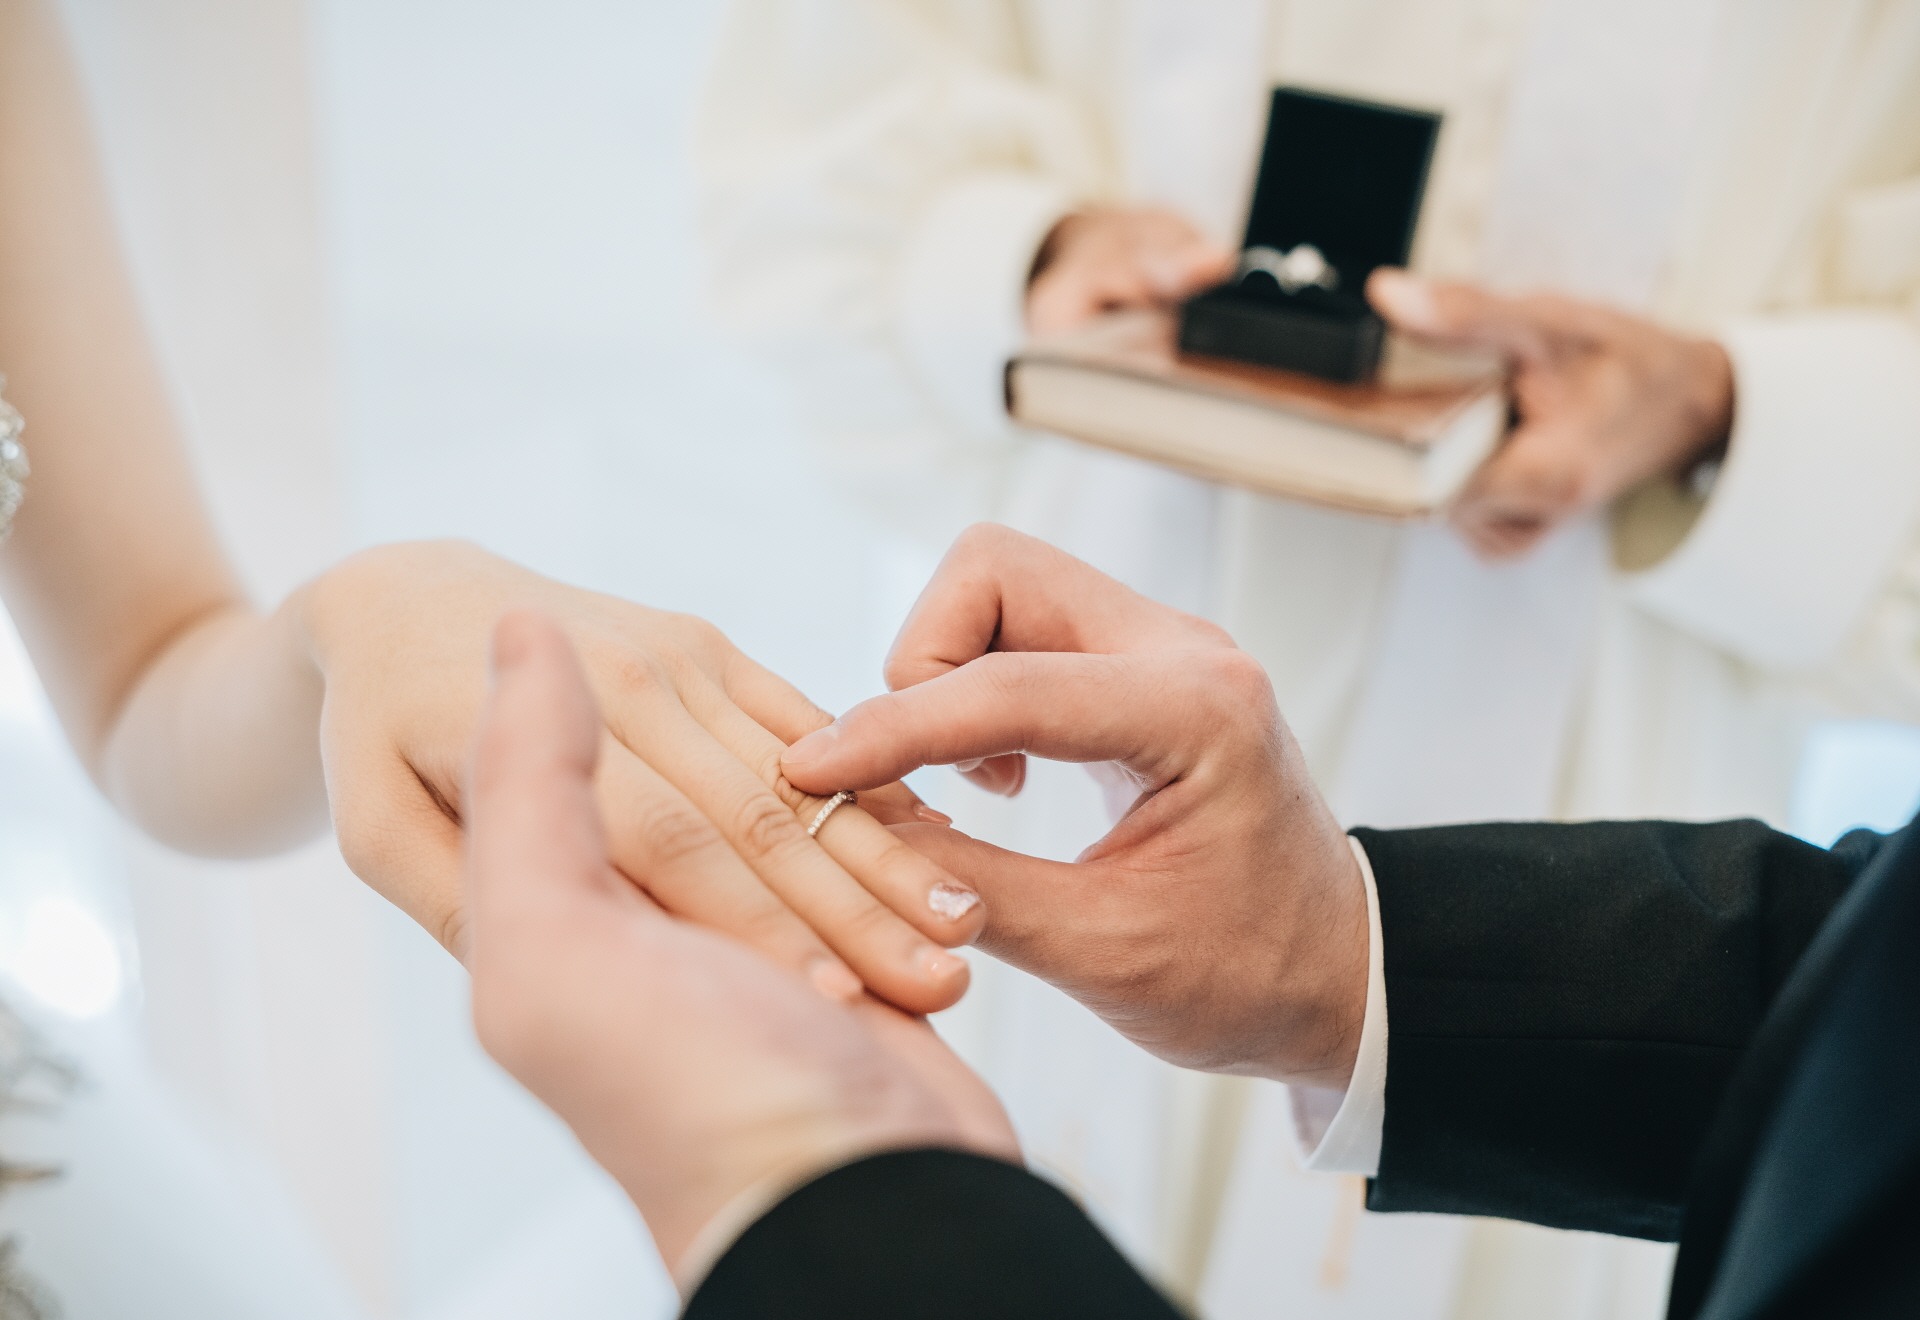 How to Wear Your Engagement Ring During the Wedding Ceremony